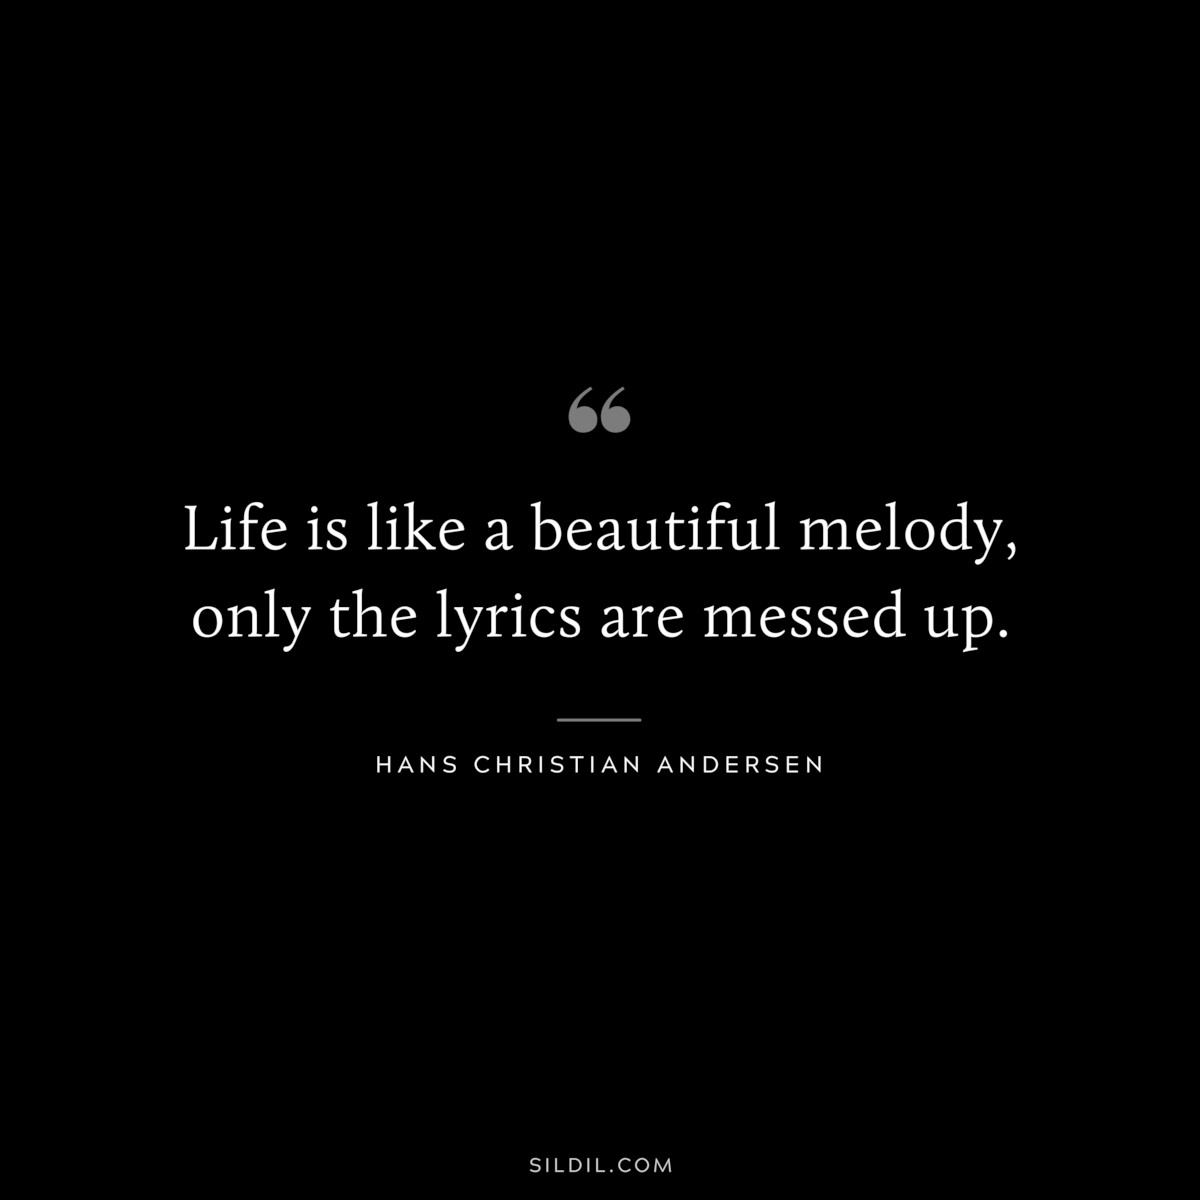 Life is like a beautiful melody, only the lyrics are messed up. ― Hans Christian Andersen